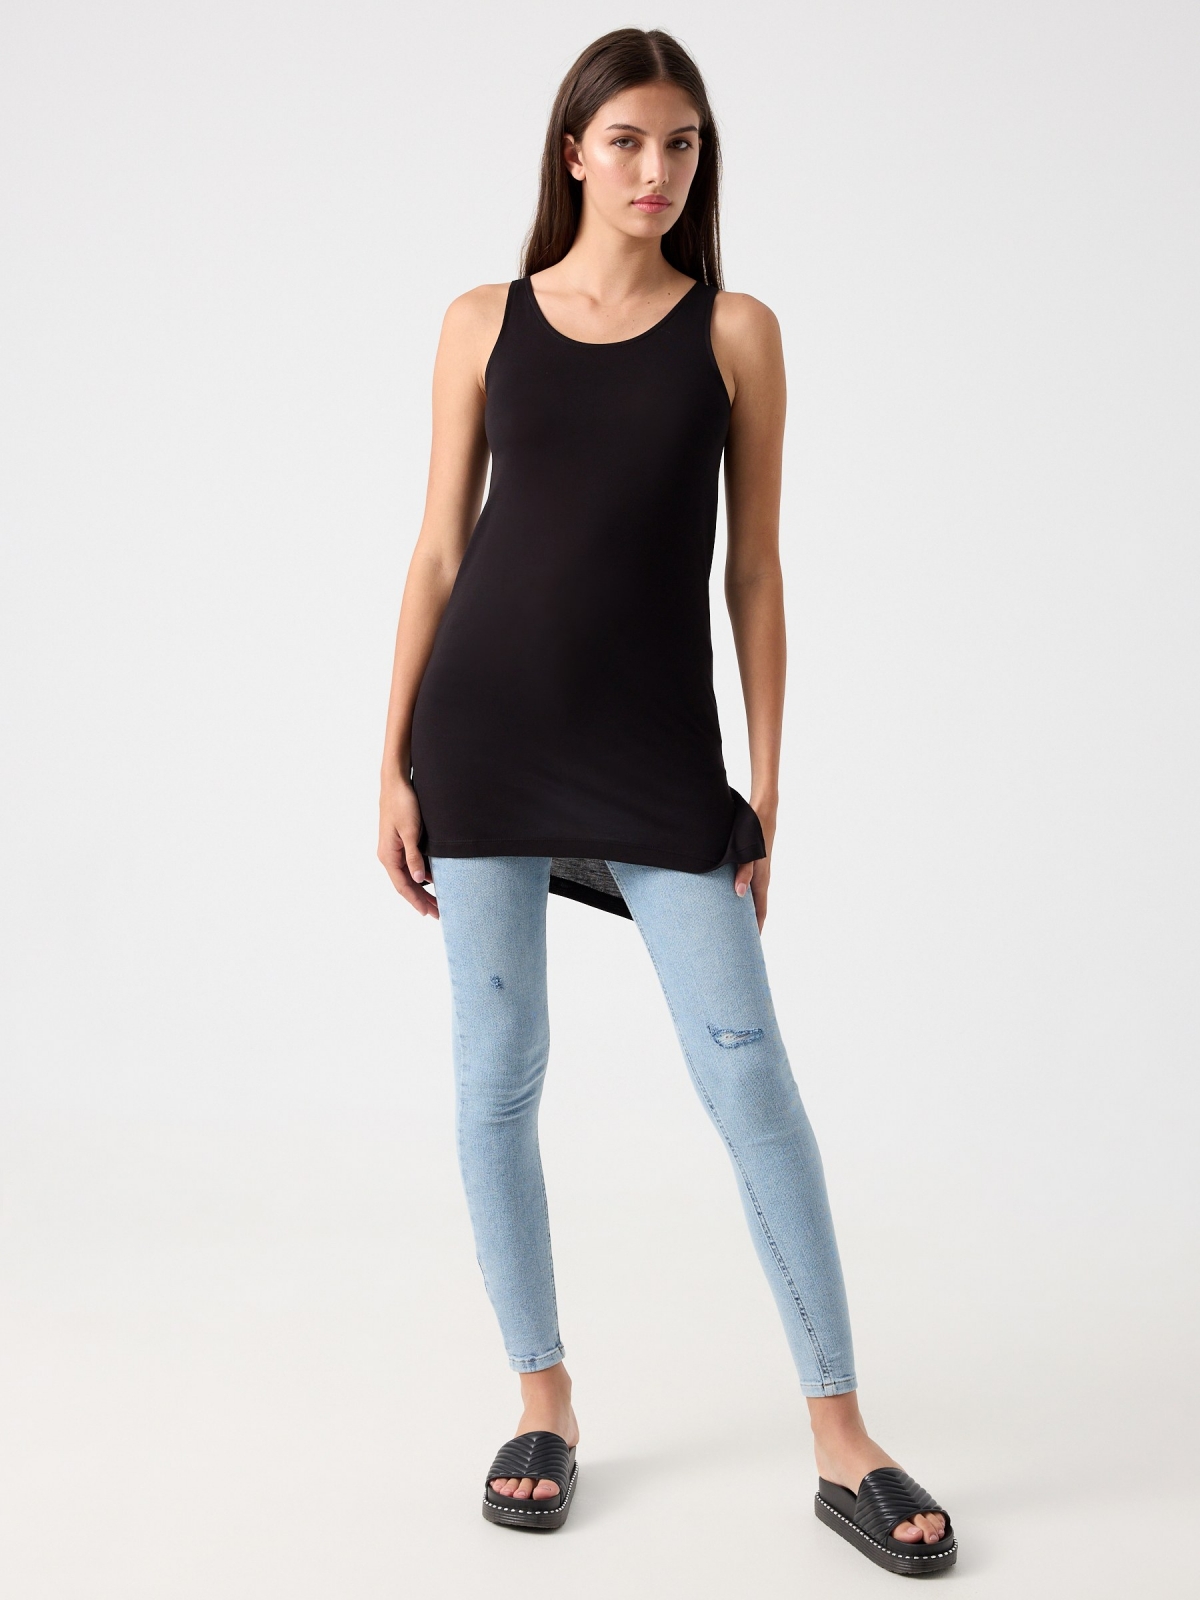 Long t-shirt with side slits black front view